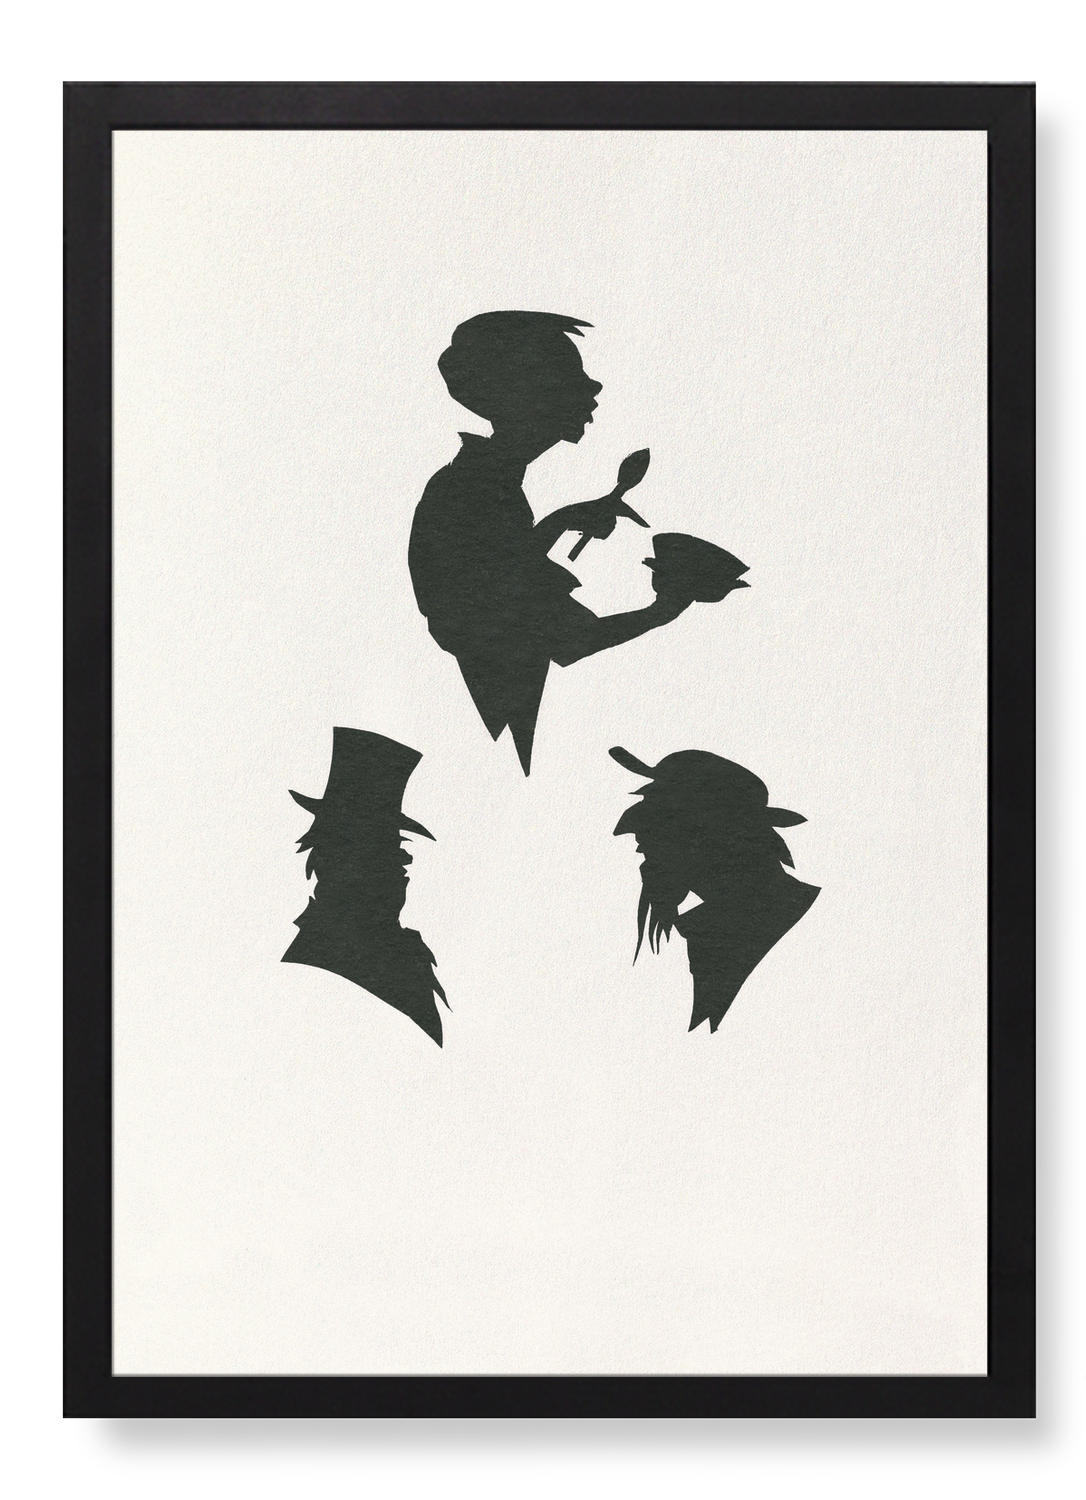 OLIVER TWIST SILHOUETTES